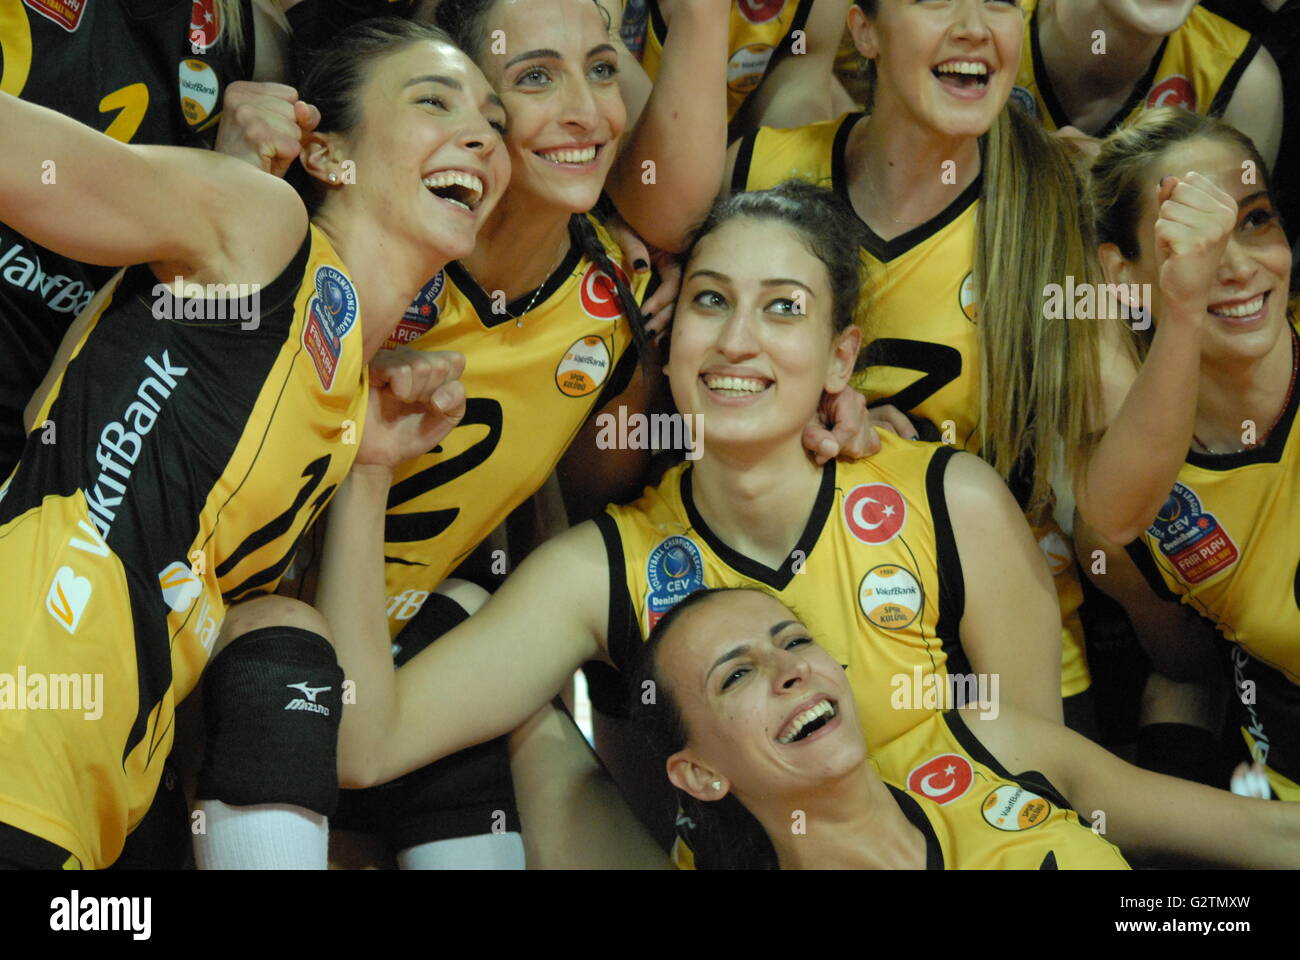 Volleyball Women 1st League of Turkey Champion Vakifbank Volleyball Team Players at the Baskent Volleyball Hall. Stock Photo